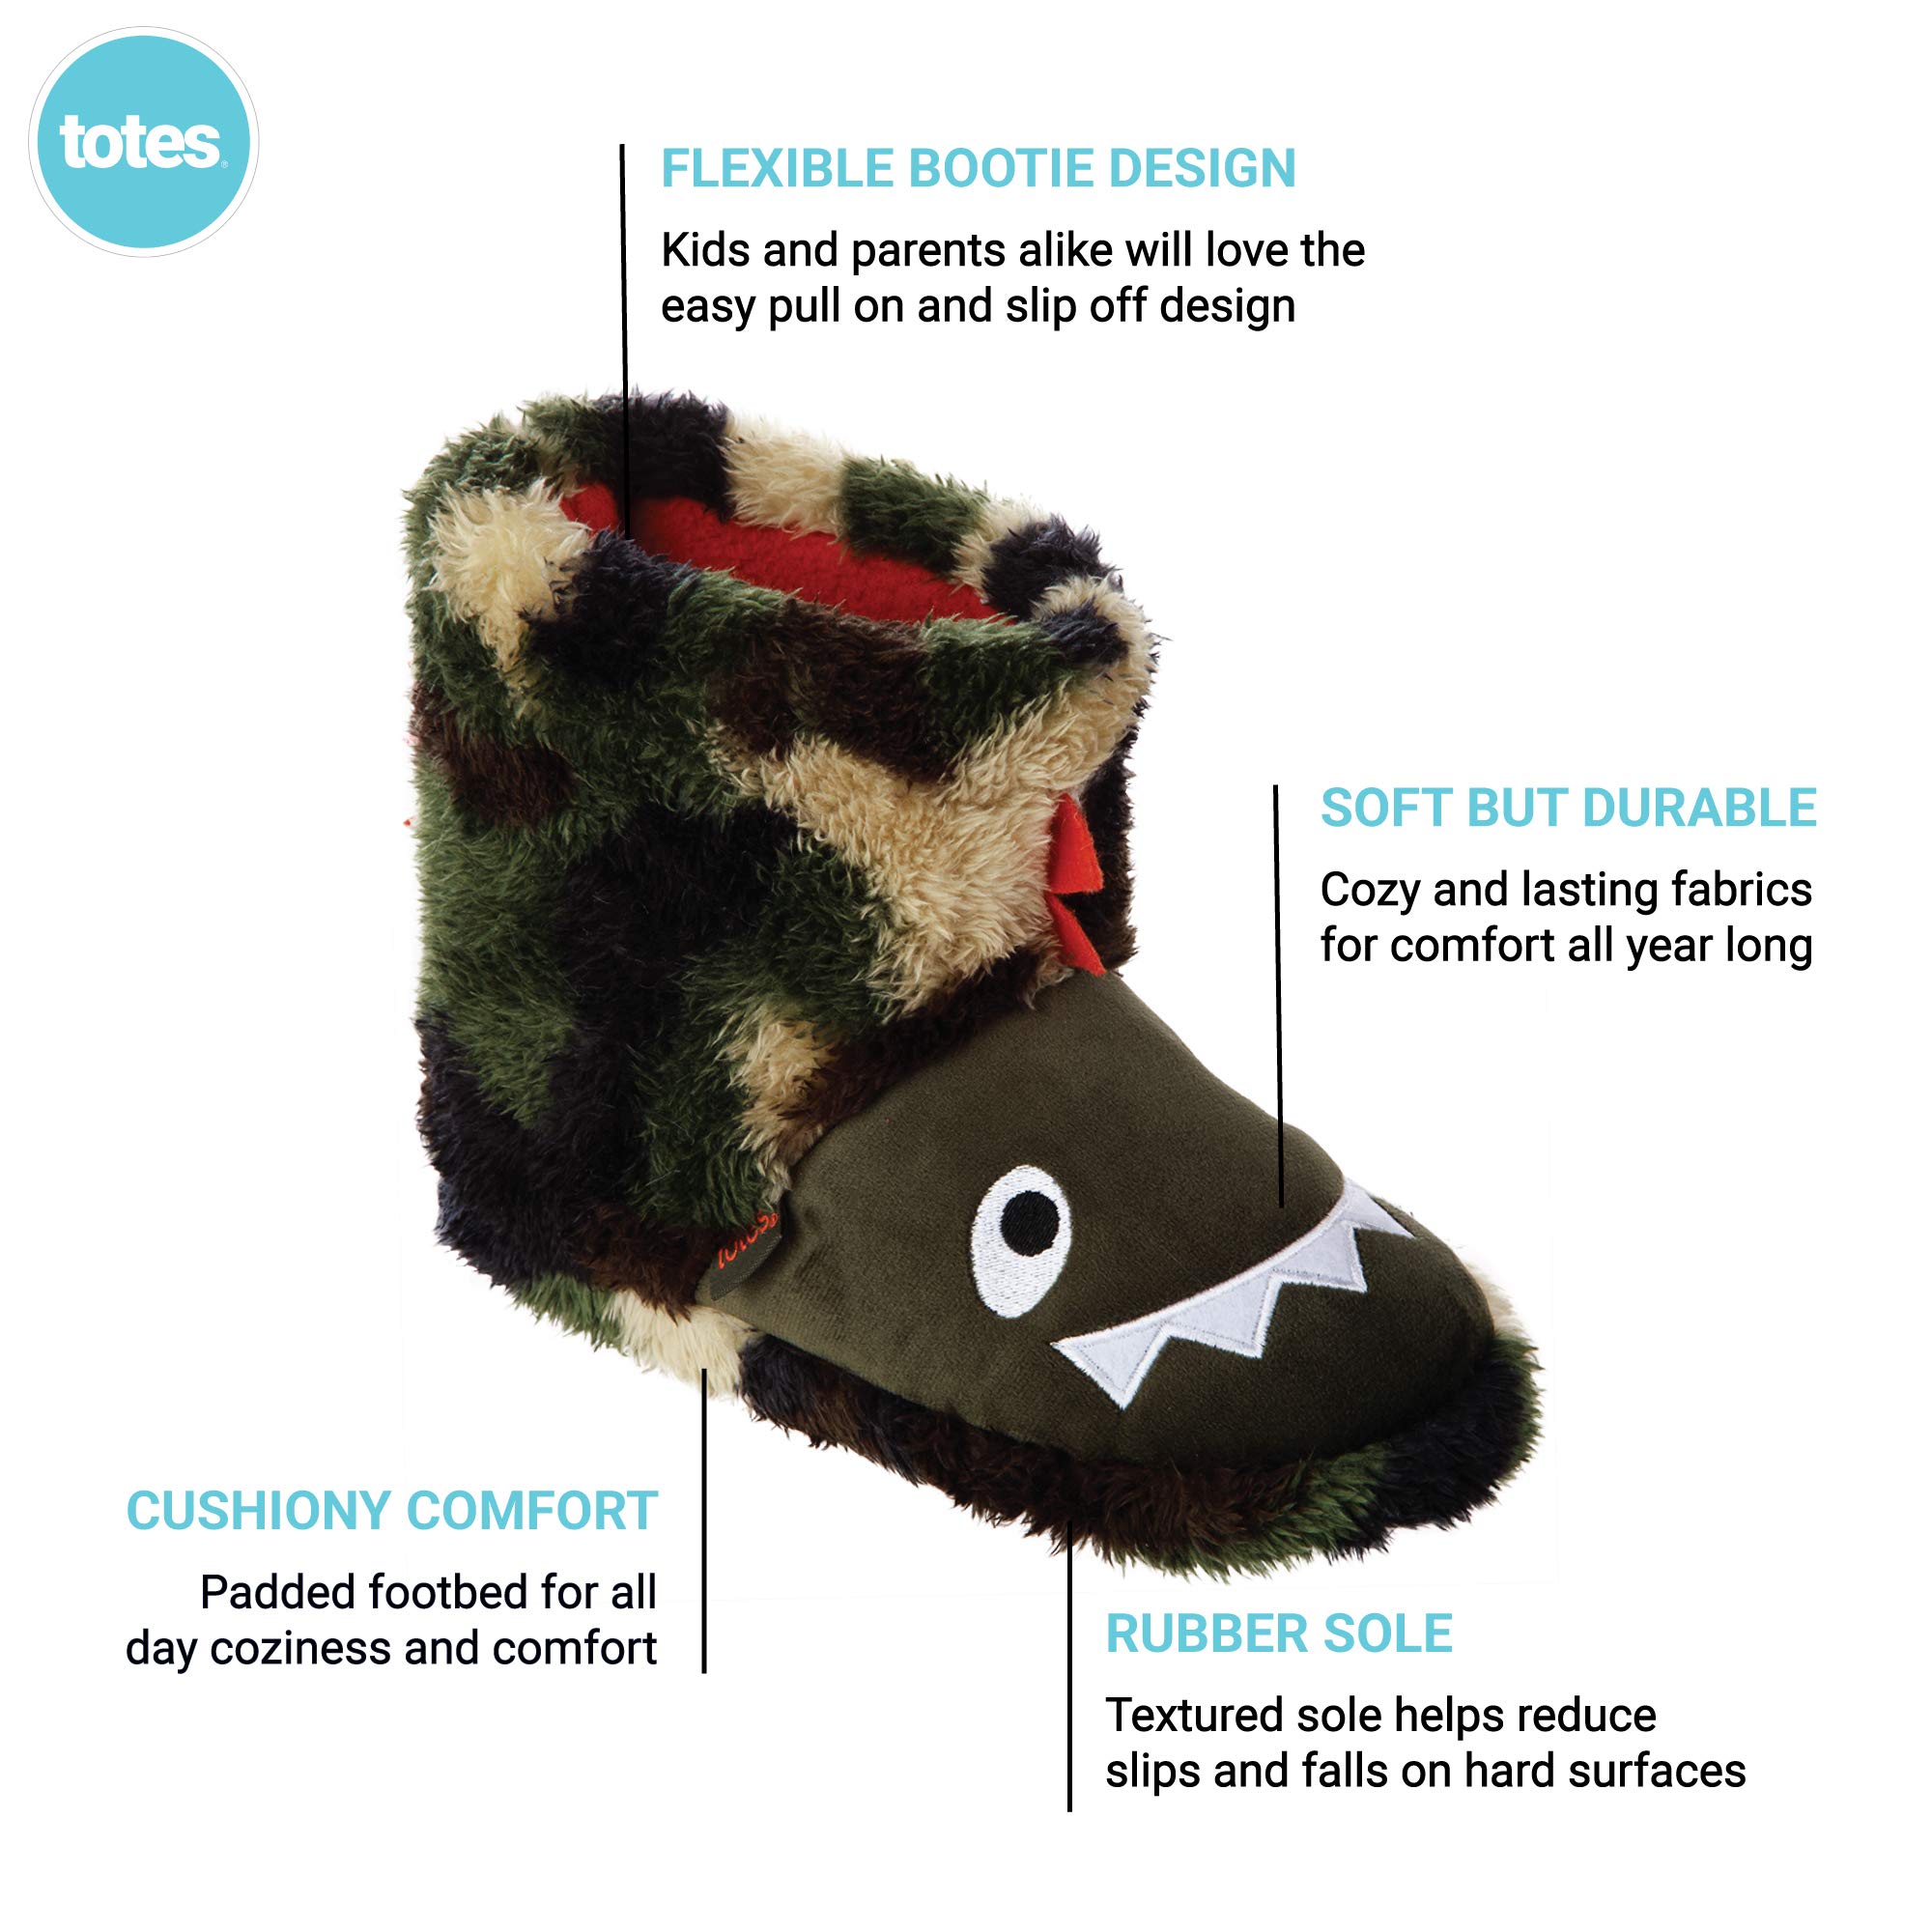 totes Girls Boys Kids Warm Soft Lightweight Washable Toddler Child Boot Slipper with Cute Animal design, Non-Slip Rubber Sole